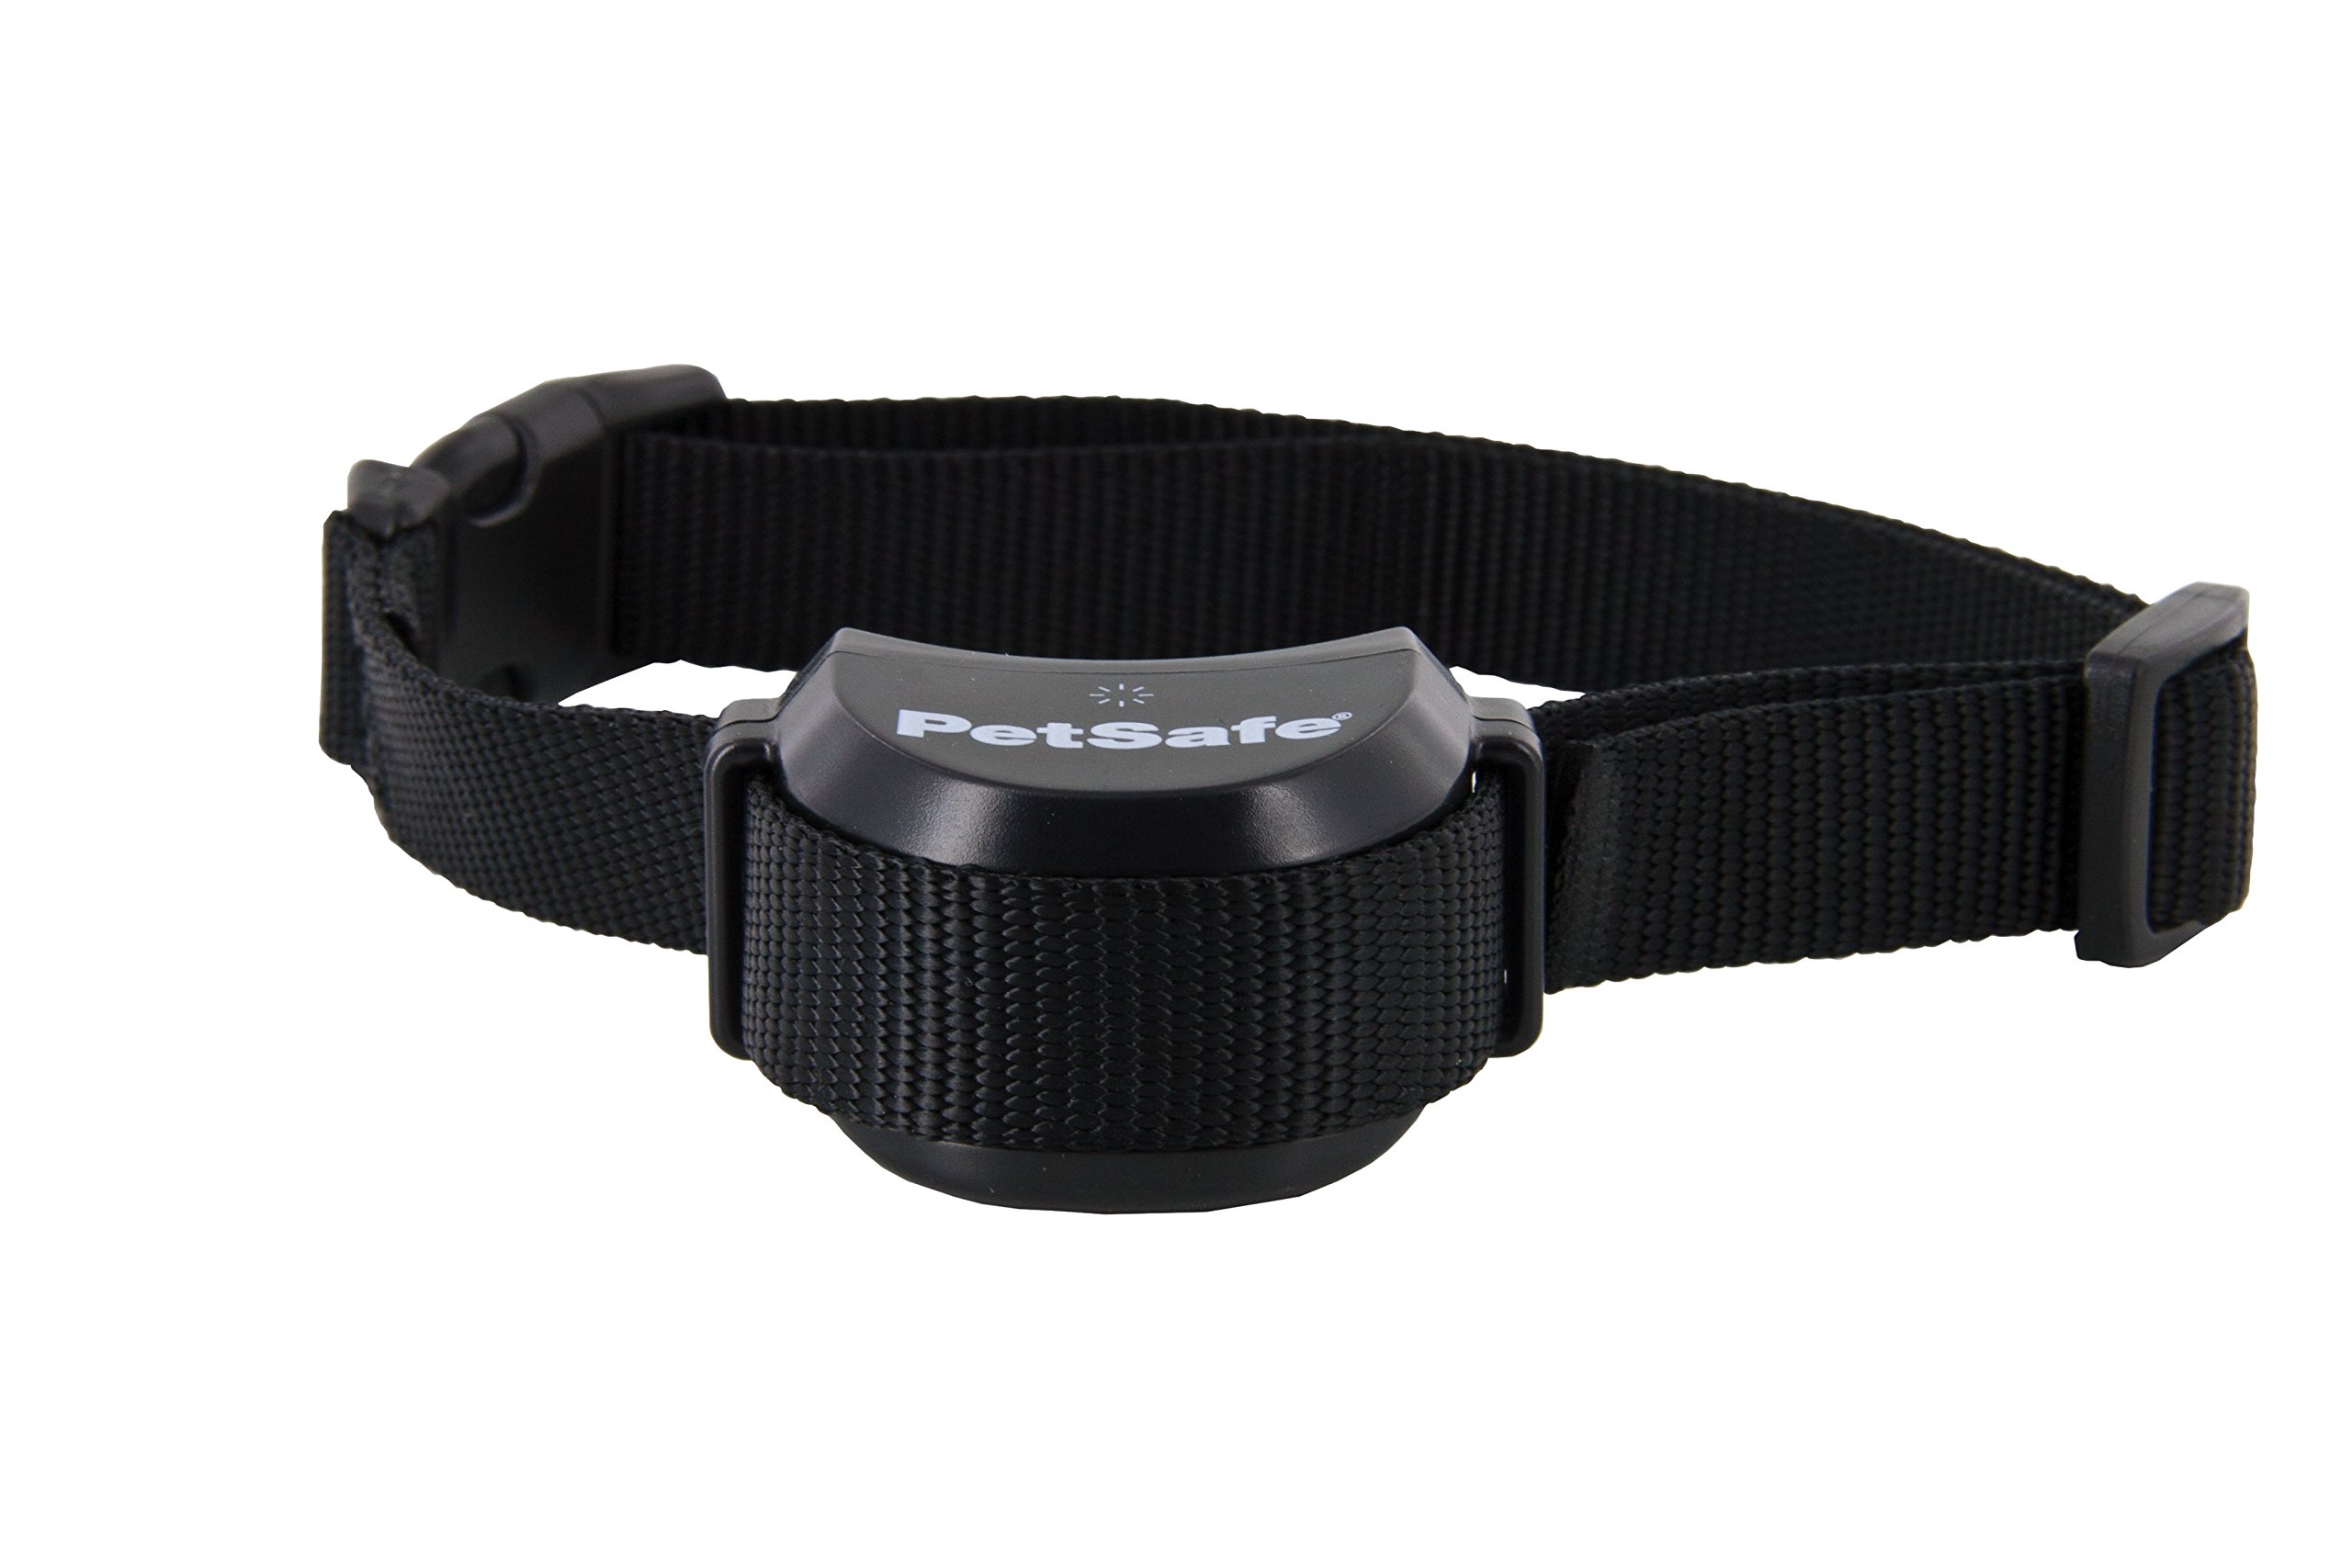 how-to-sync-petsafe-wireless-fence-collar